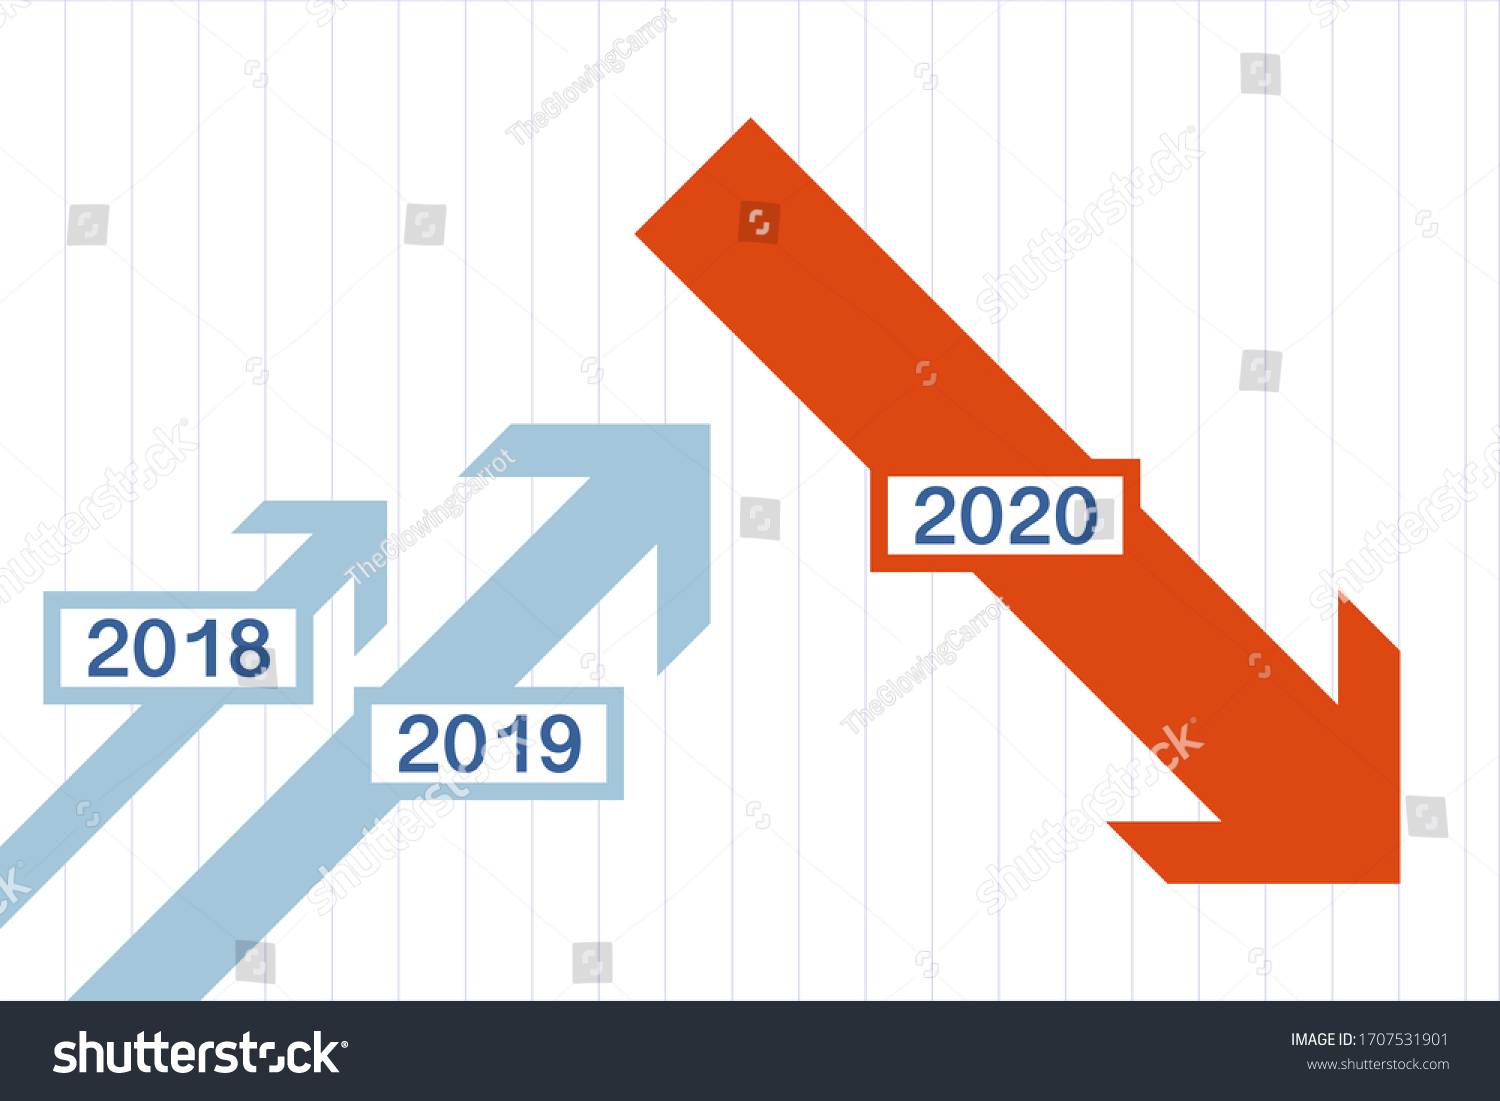 SVG of Info graph chart showing arrows representing economic growth in 2019 and decline in 2020. svg